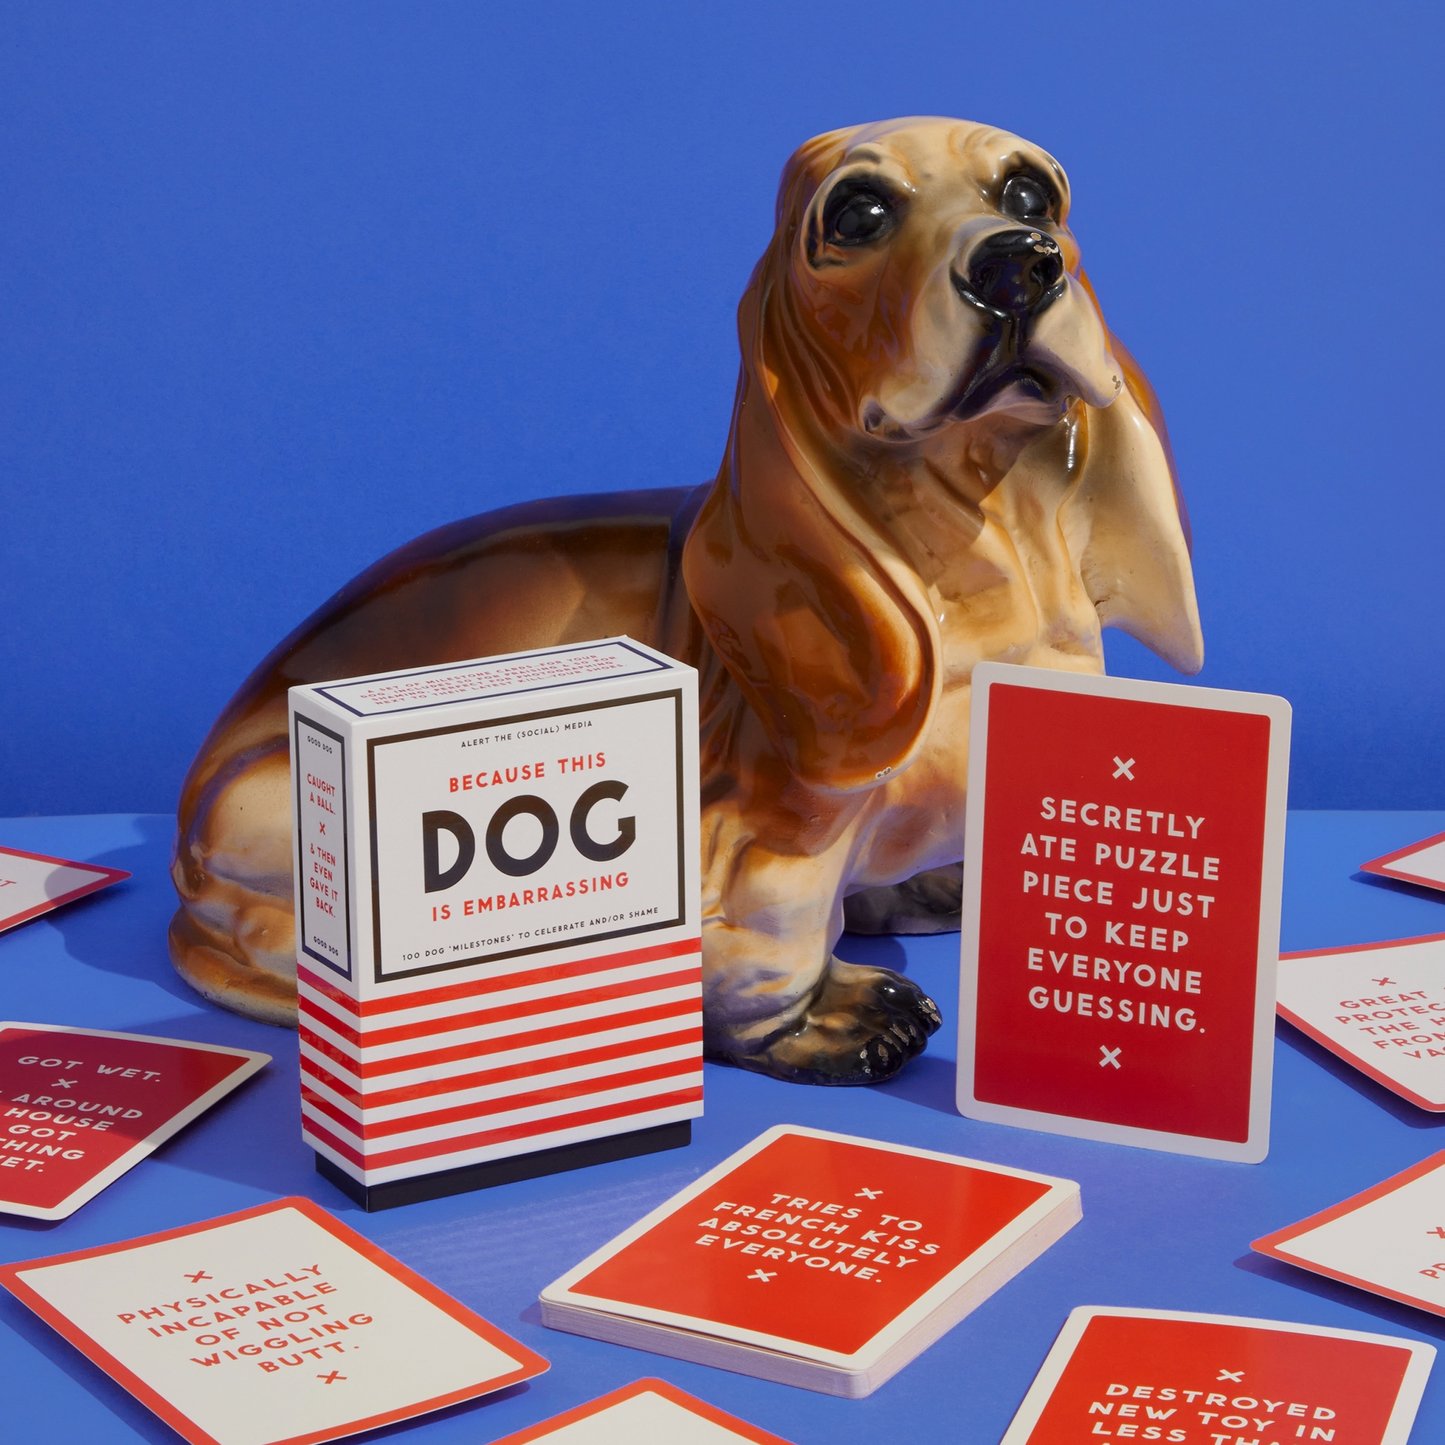 Load image into Gallery viewer, Because This Dog Is Embarrassing - Pet Shame/Praise Deck To Alert Social Media - 50 double-sided cards
